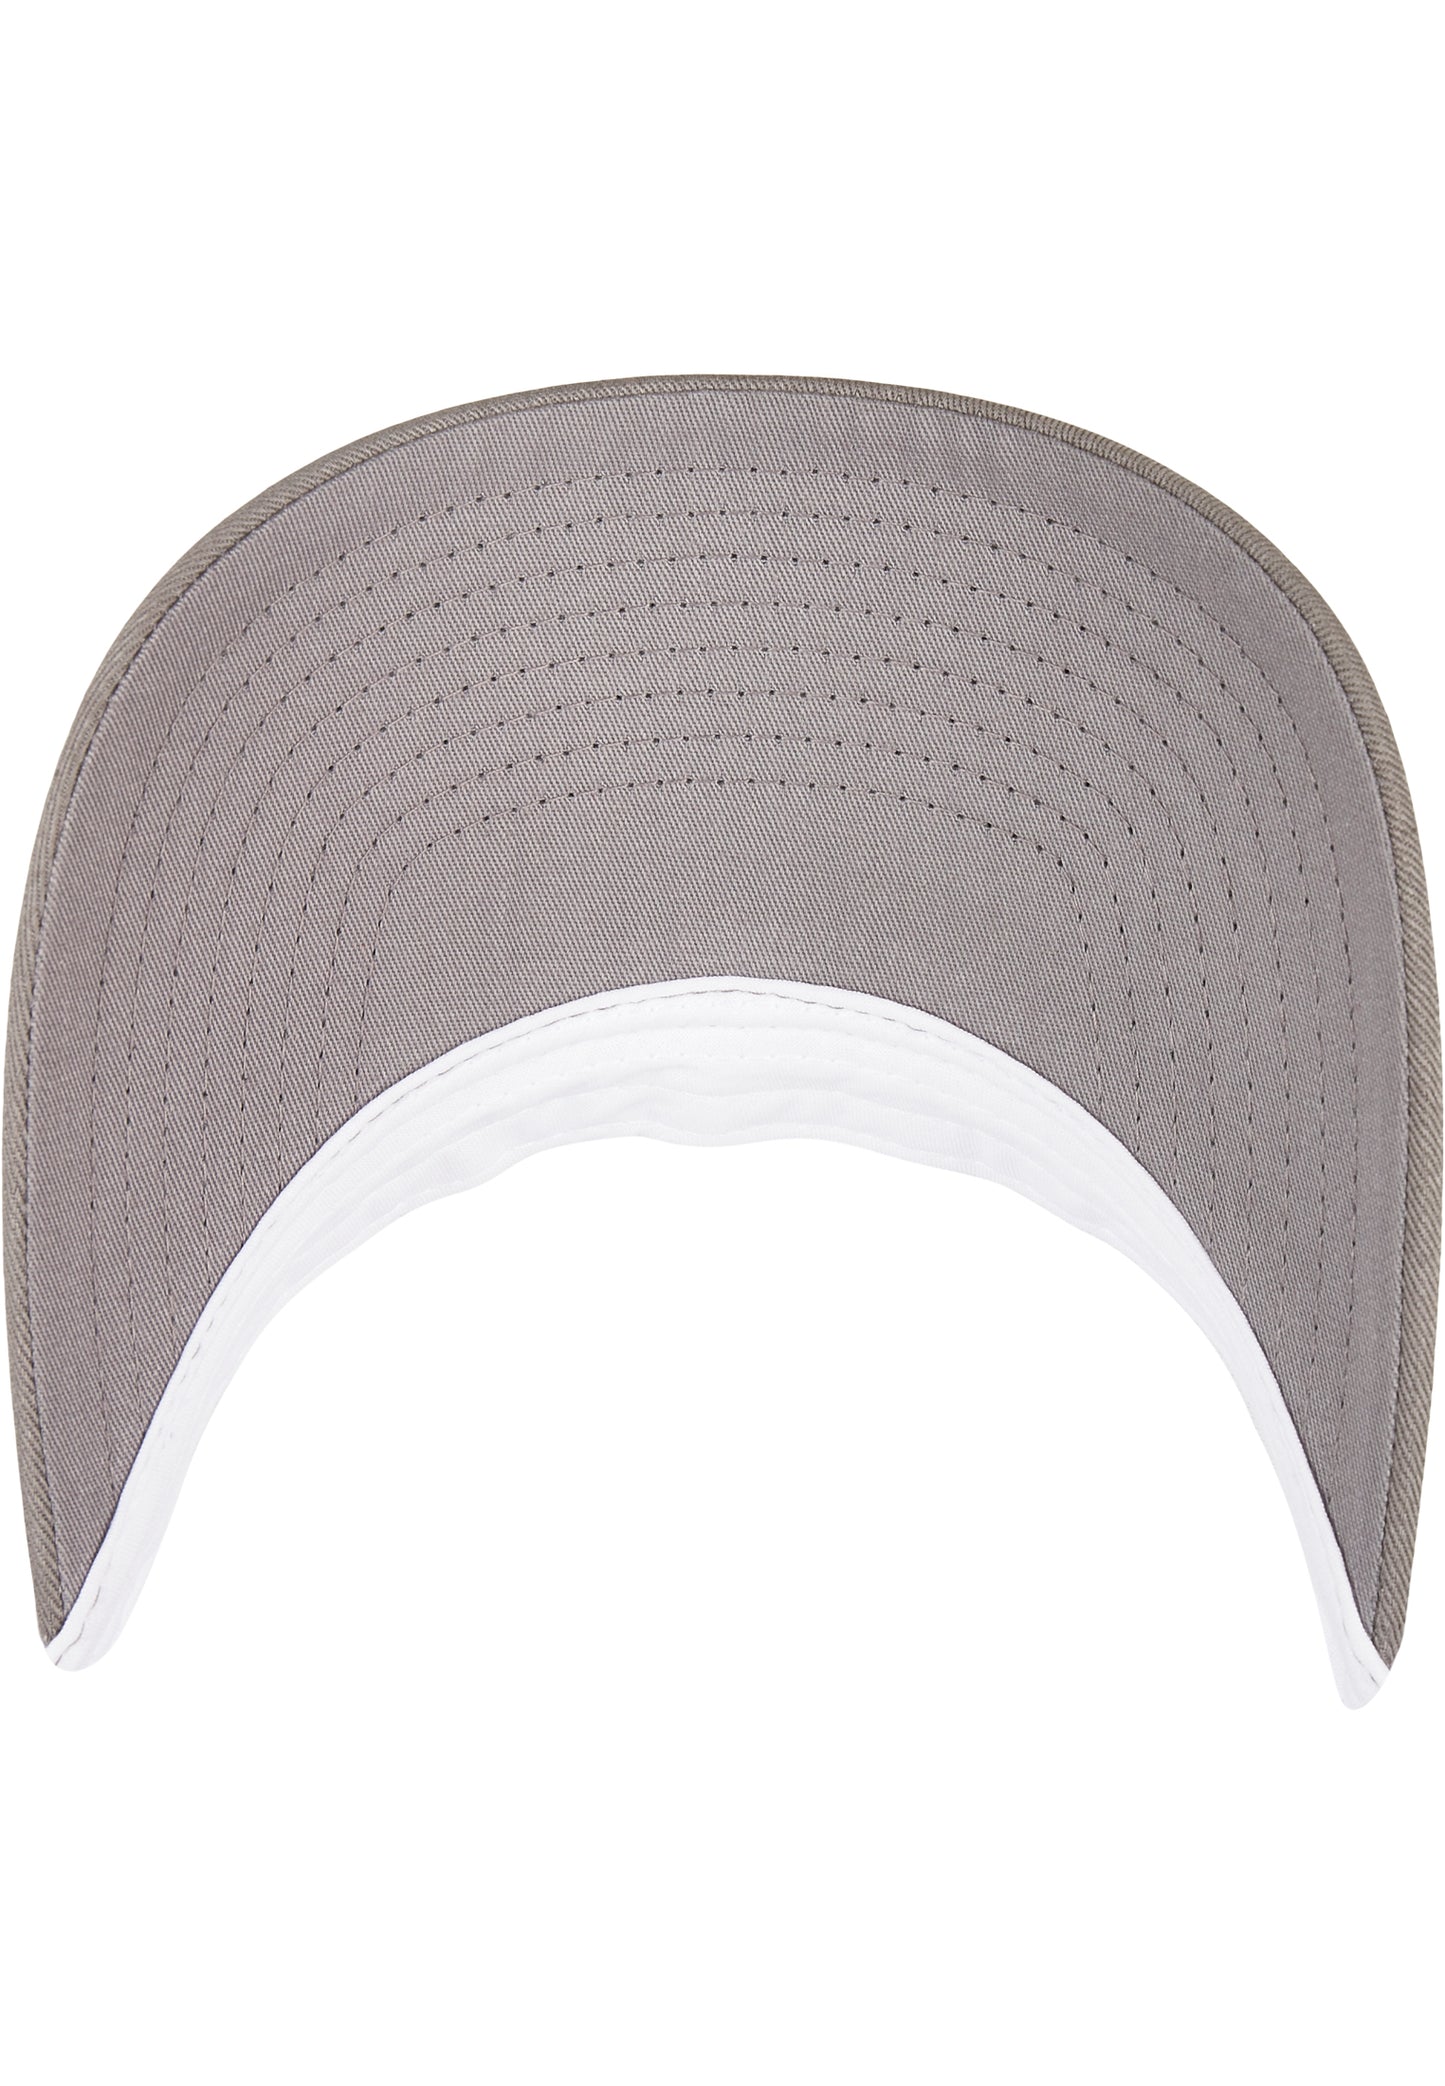 Yupoong Classics Recycled Retro Trucker Cap 2-TONE in grey/white